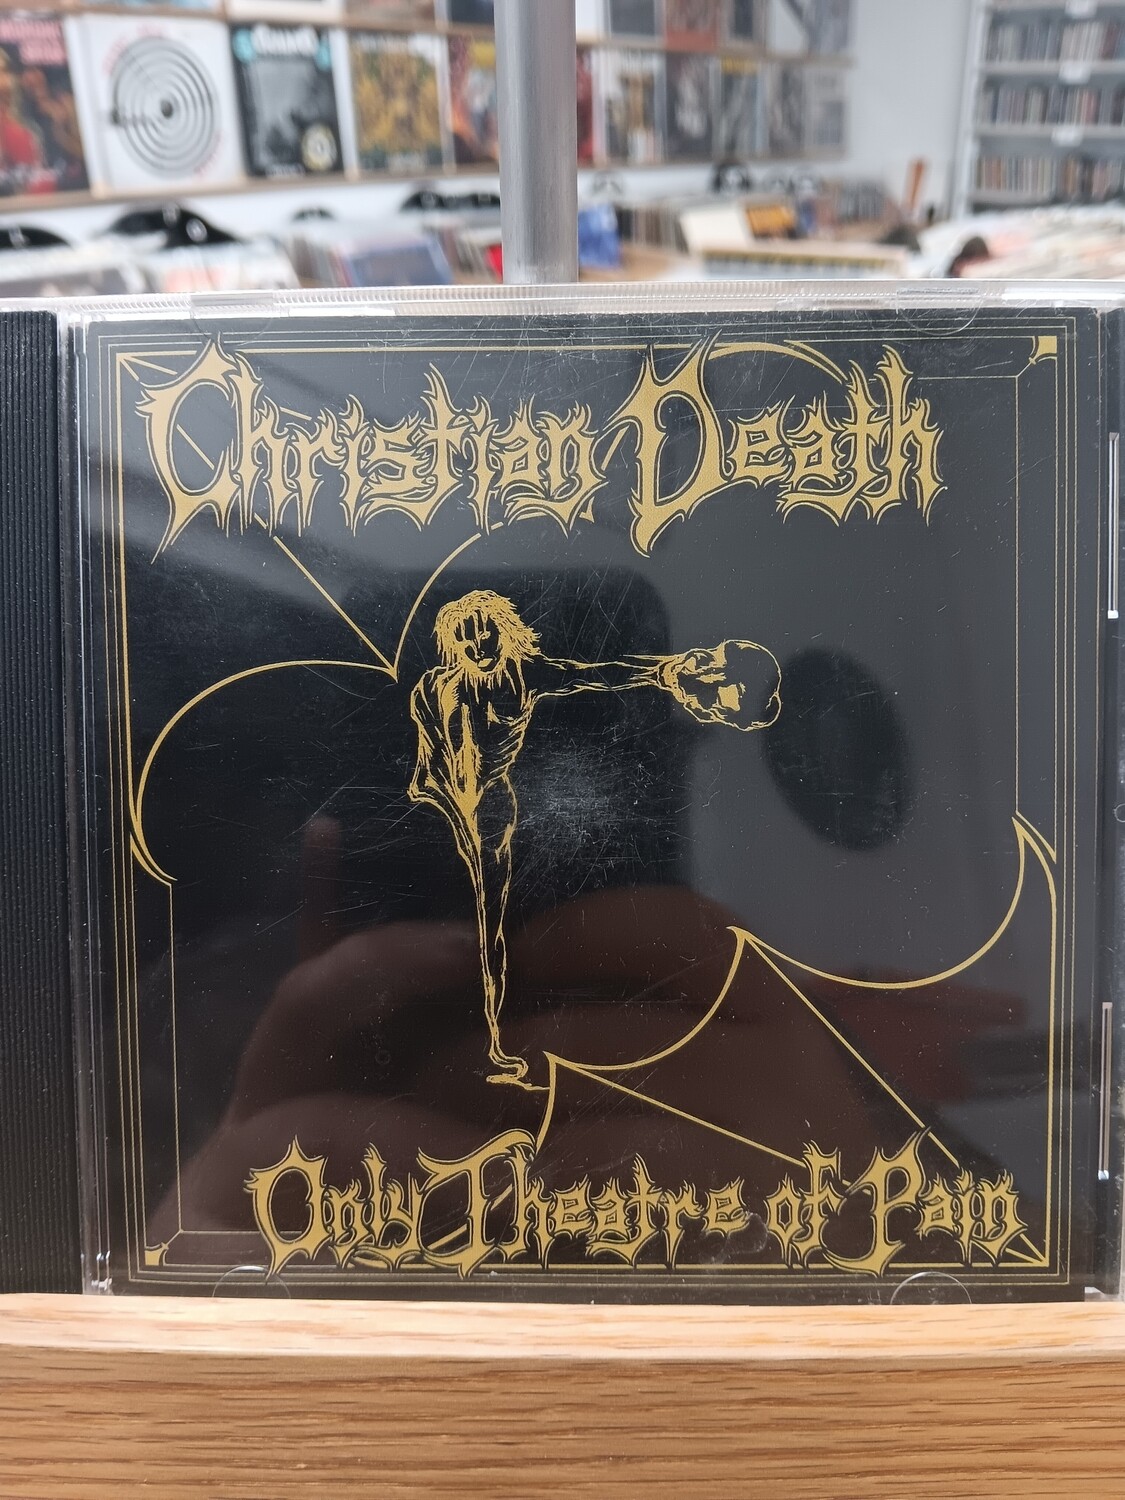 CHRISTIAN DEATH - Only theatre of pain (CD)